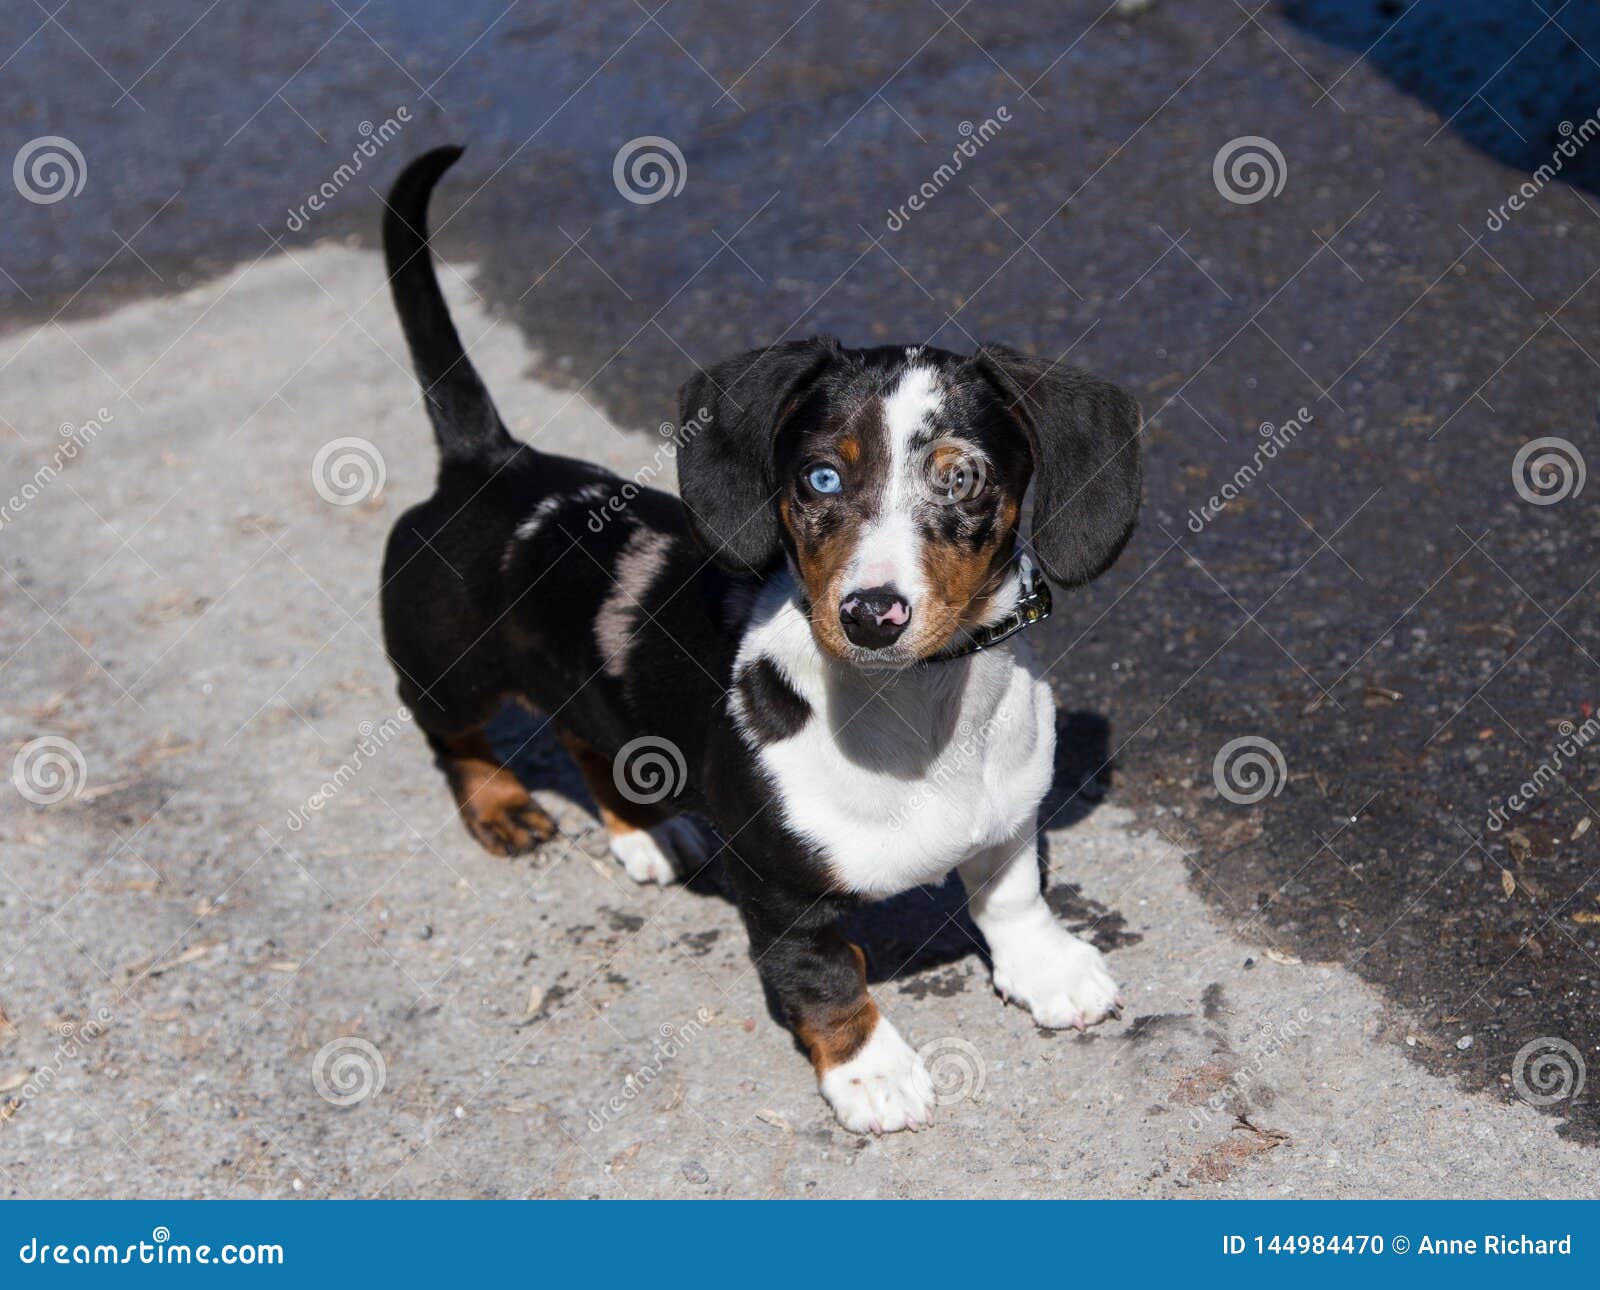 high angle view of adorable odd-eyed tricolour unleashed dachshund puppy